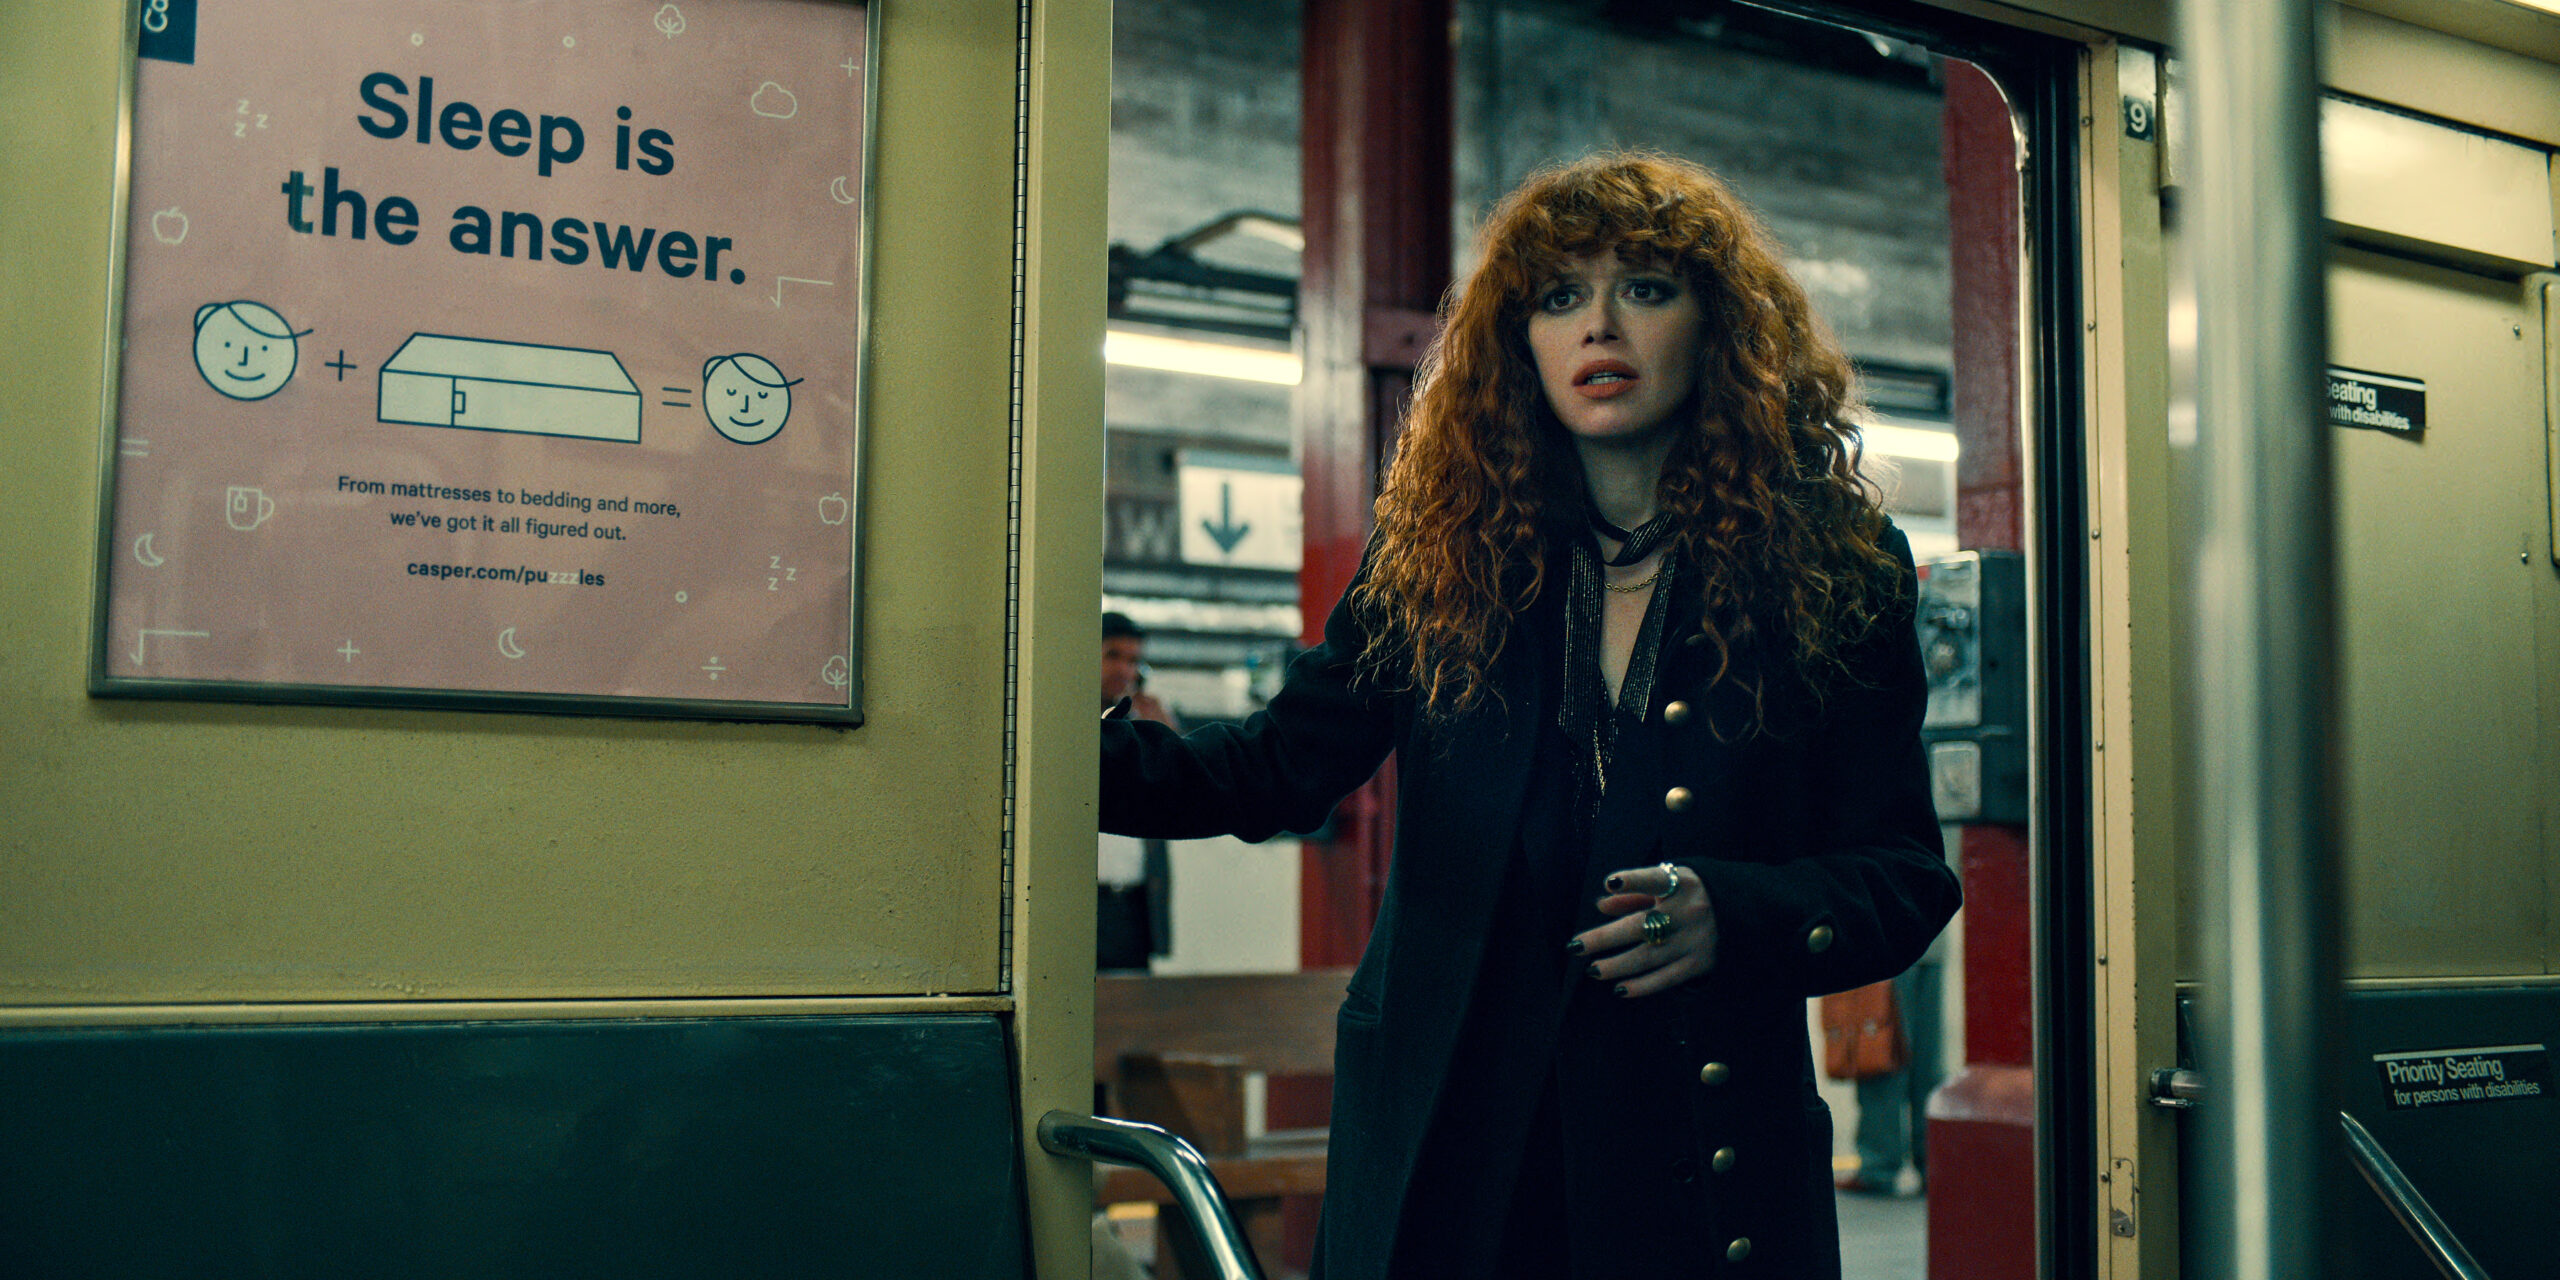 Pick of the Day: “Russian Doll”